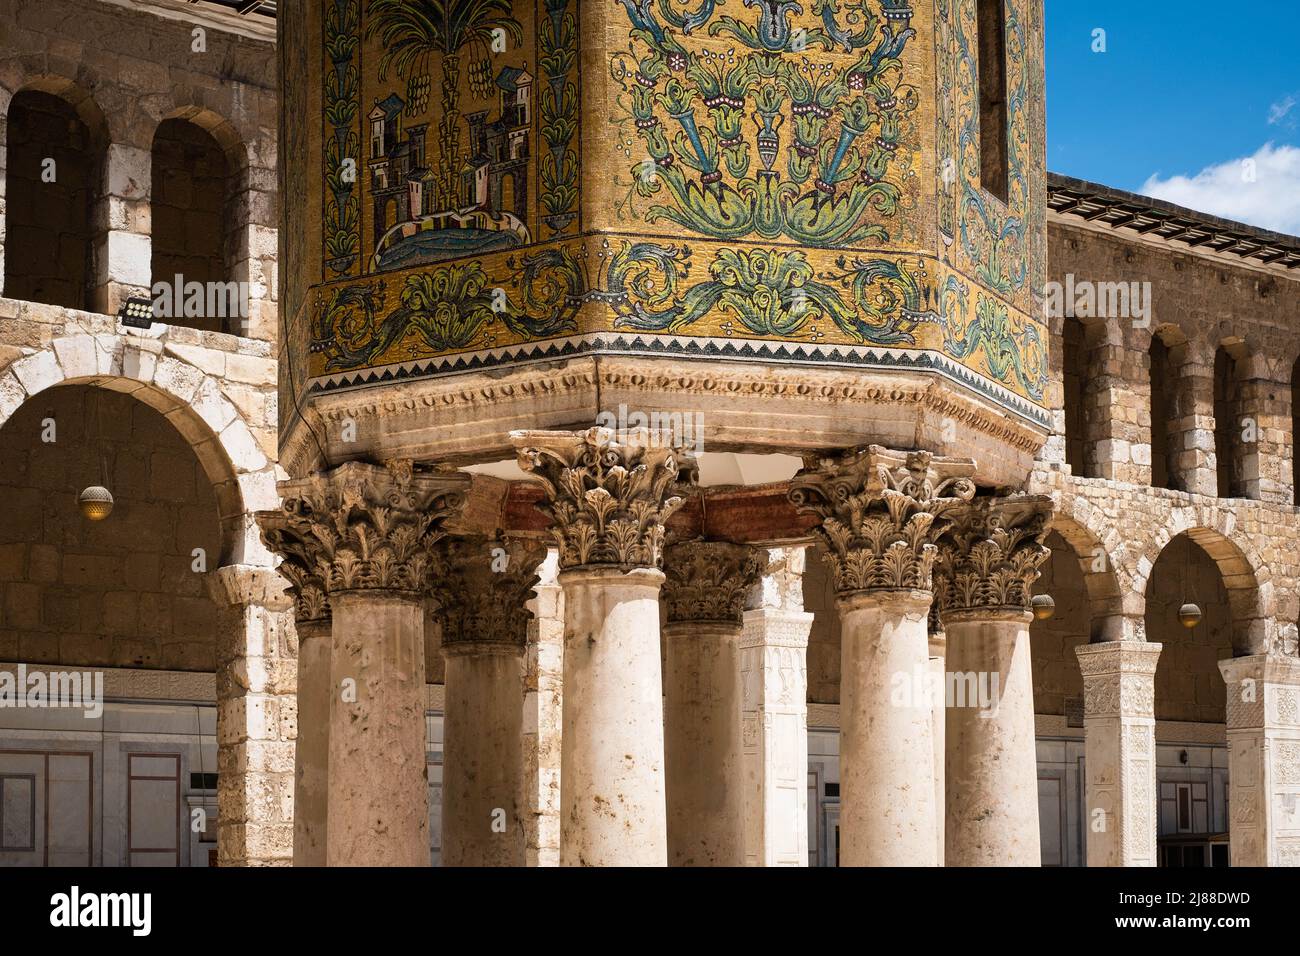 Damascus, Syria -May, 2022: Columns inside the Umayyad Mosque, also known as the Great Mosque of Damascus Stock Photo